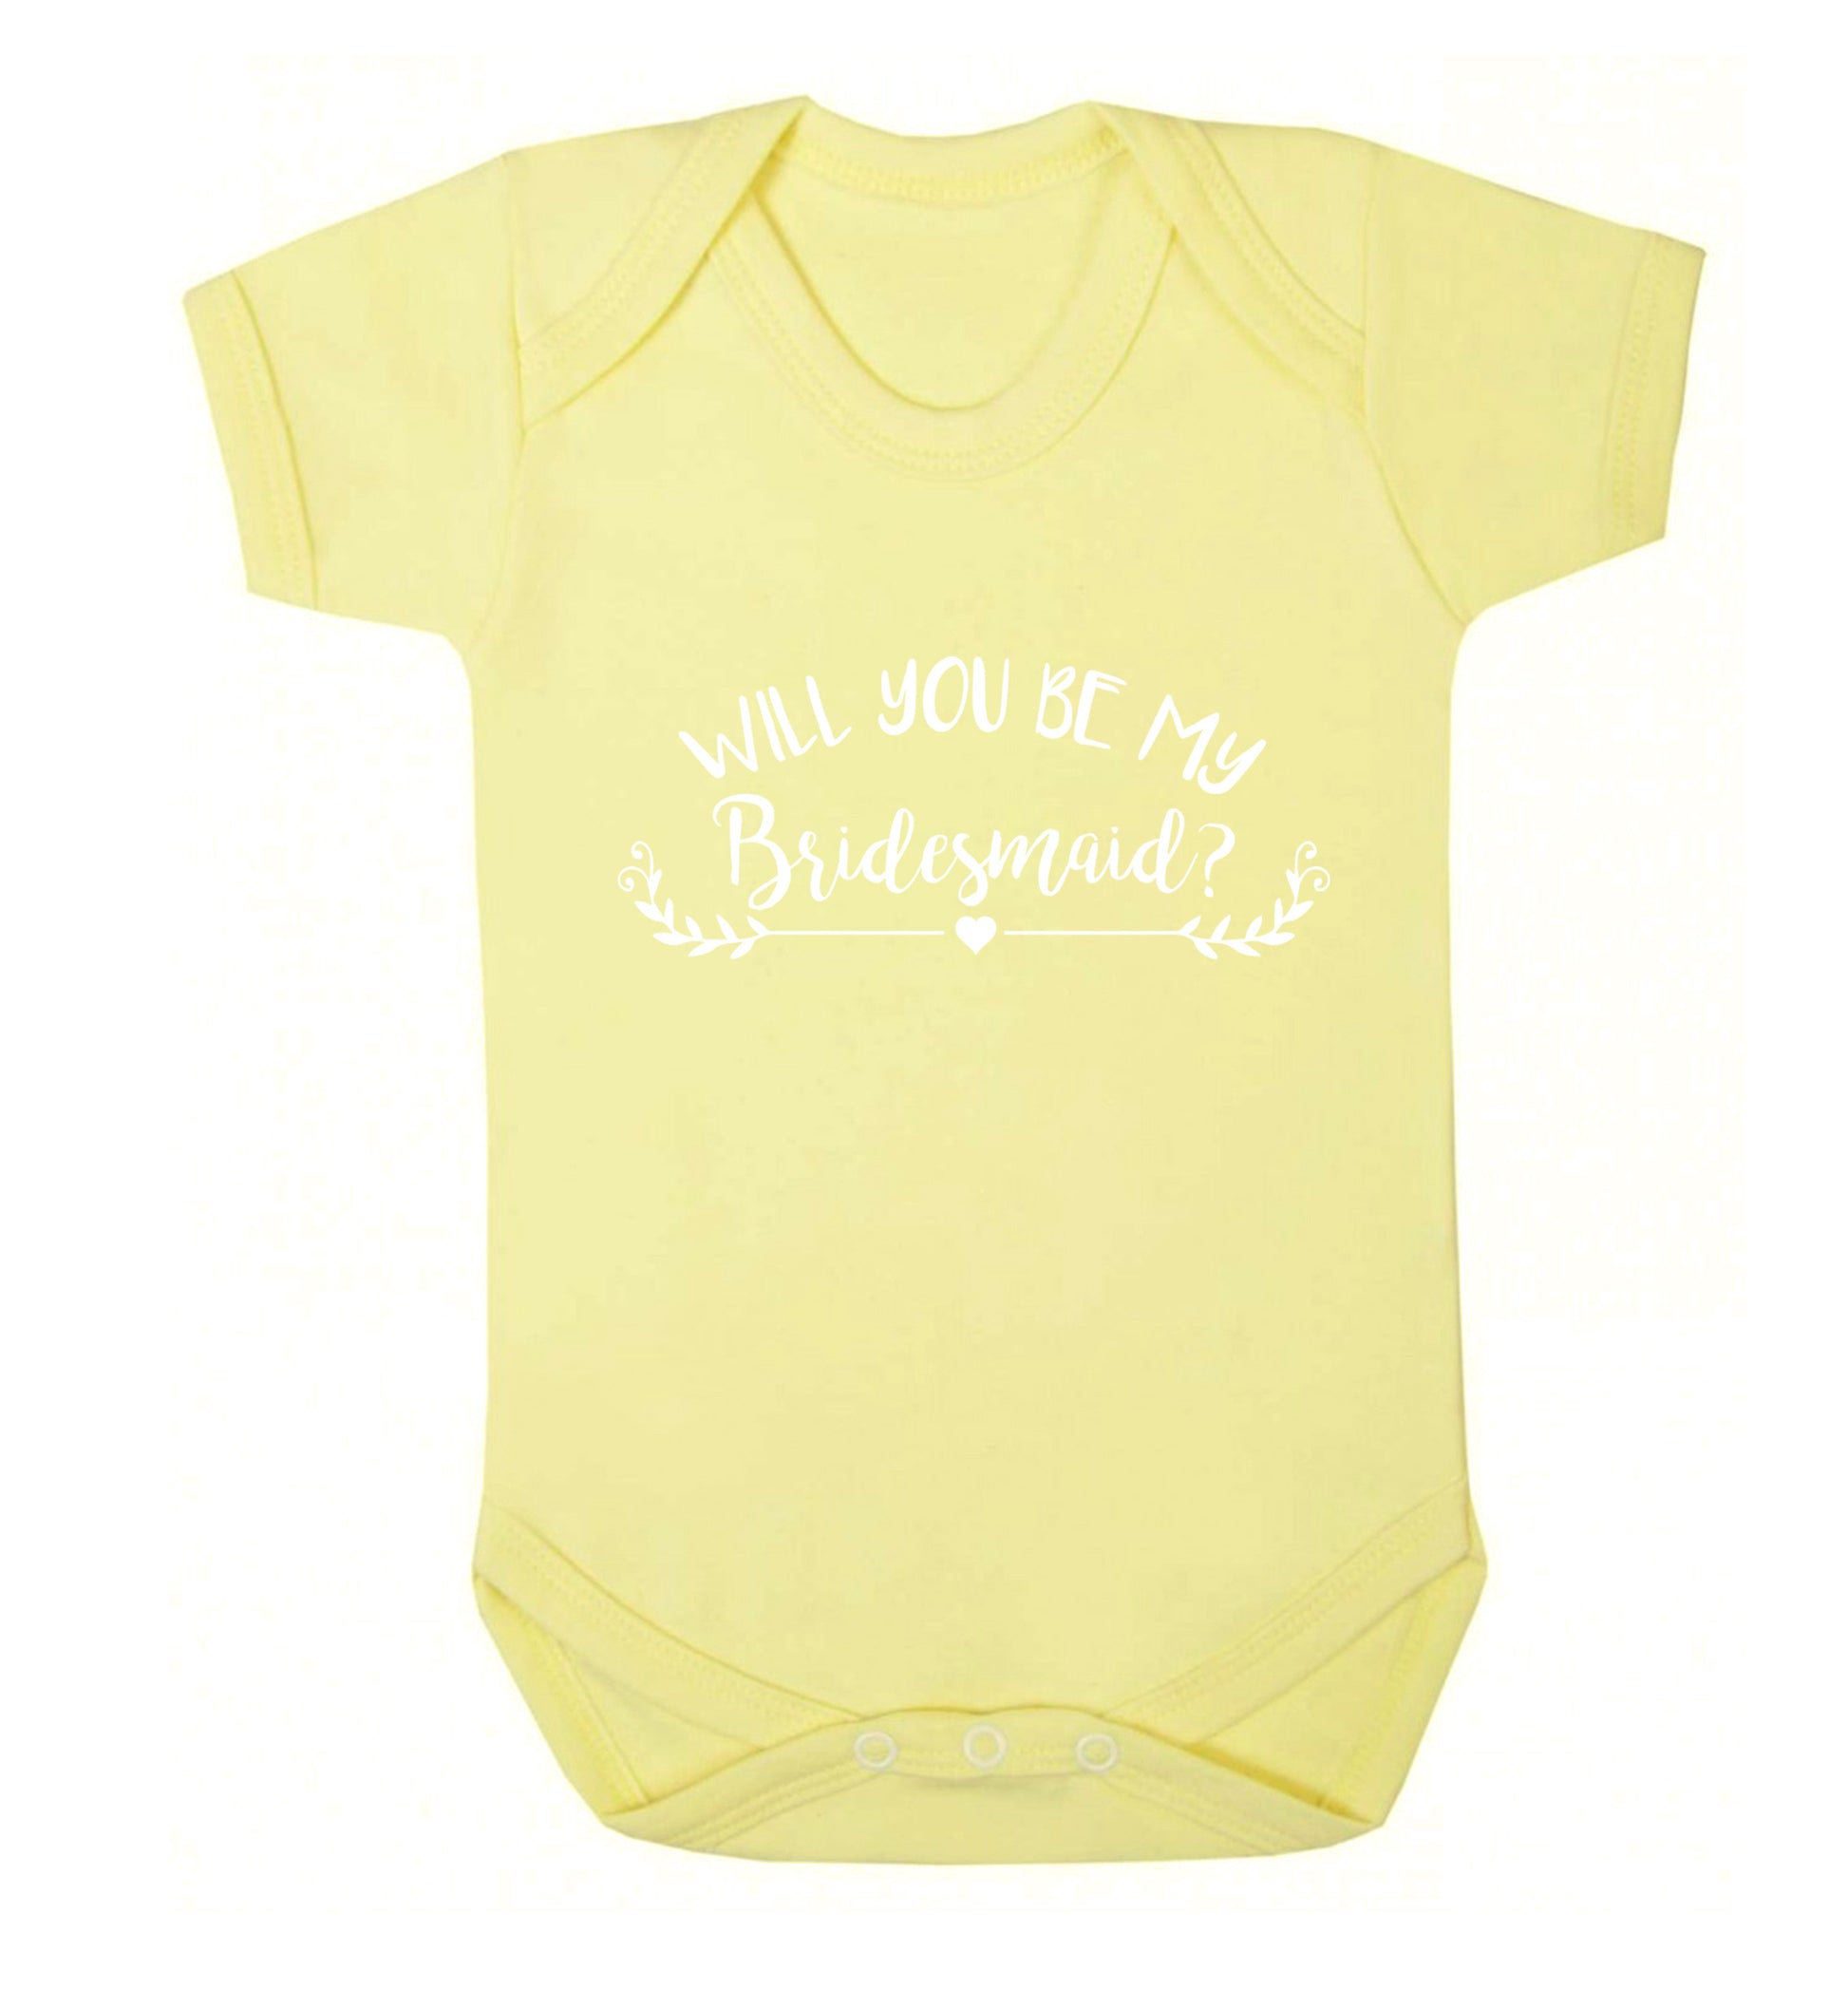 Will you be my bridesmaid? Baby Vest pale yellow 18-24 months